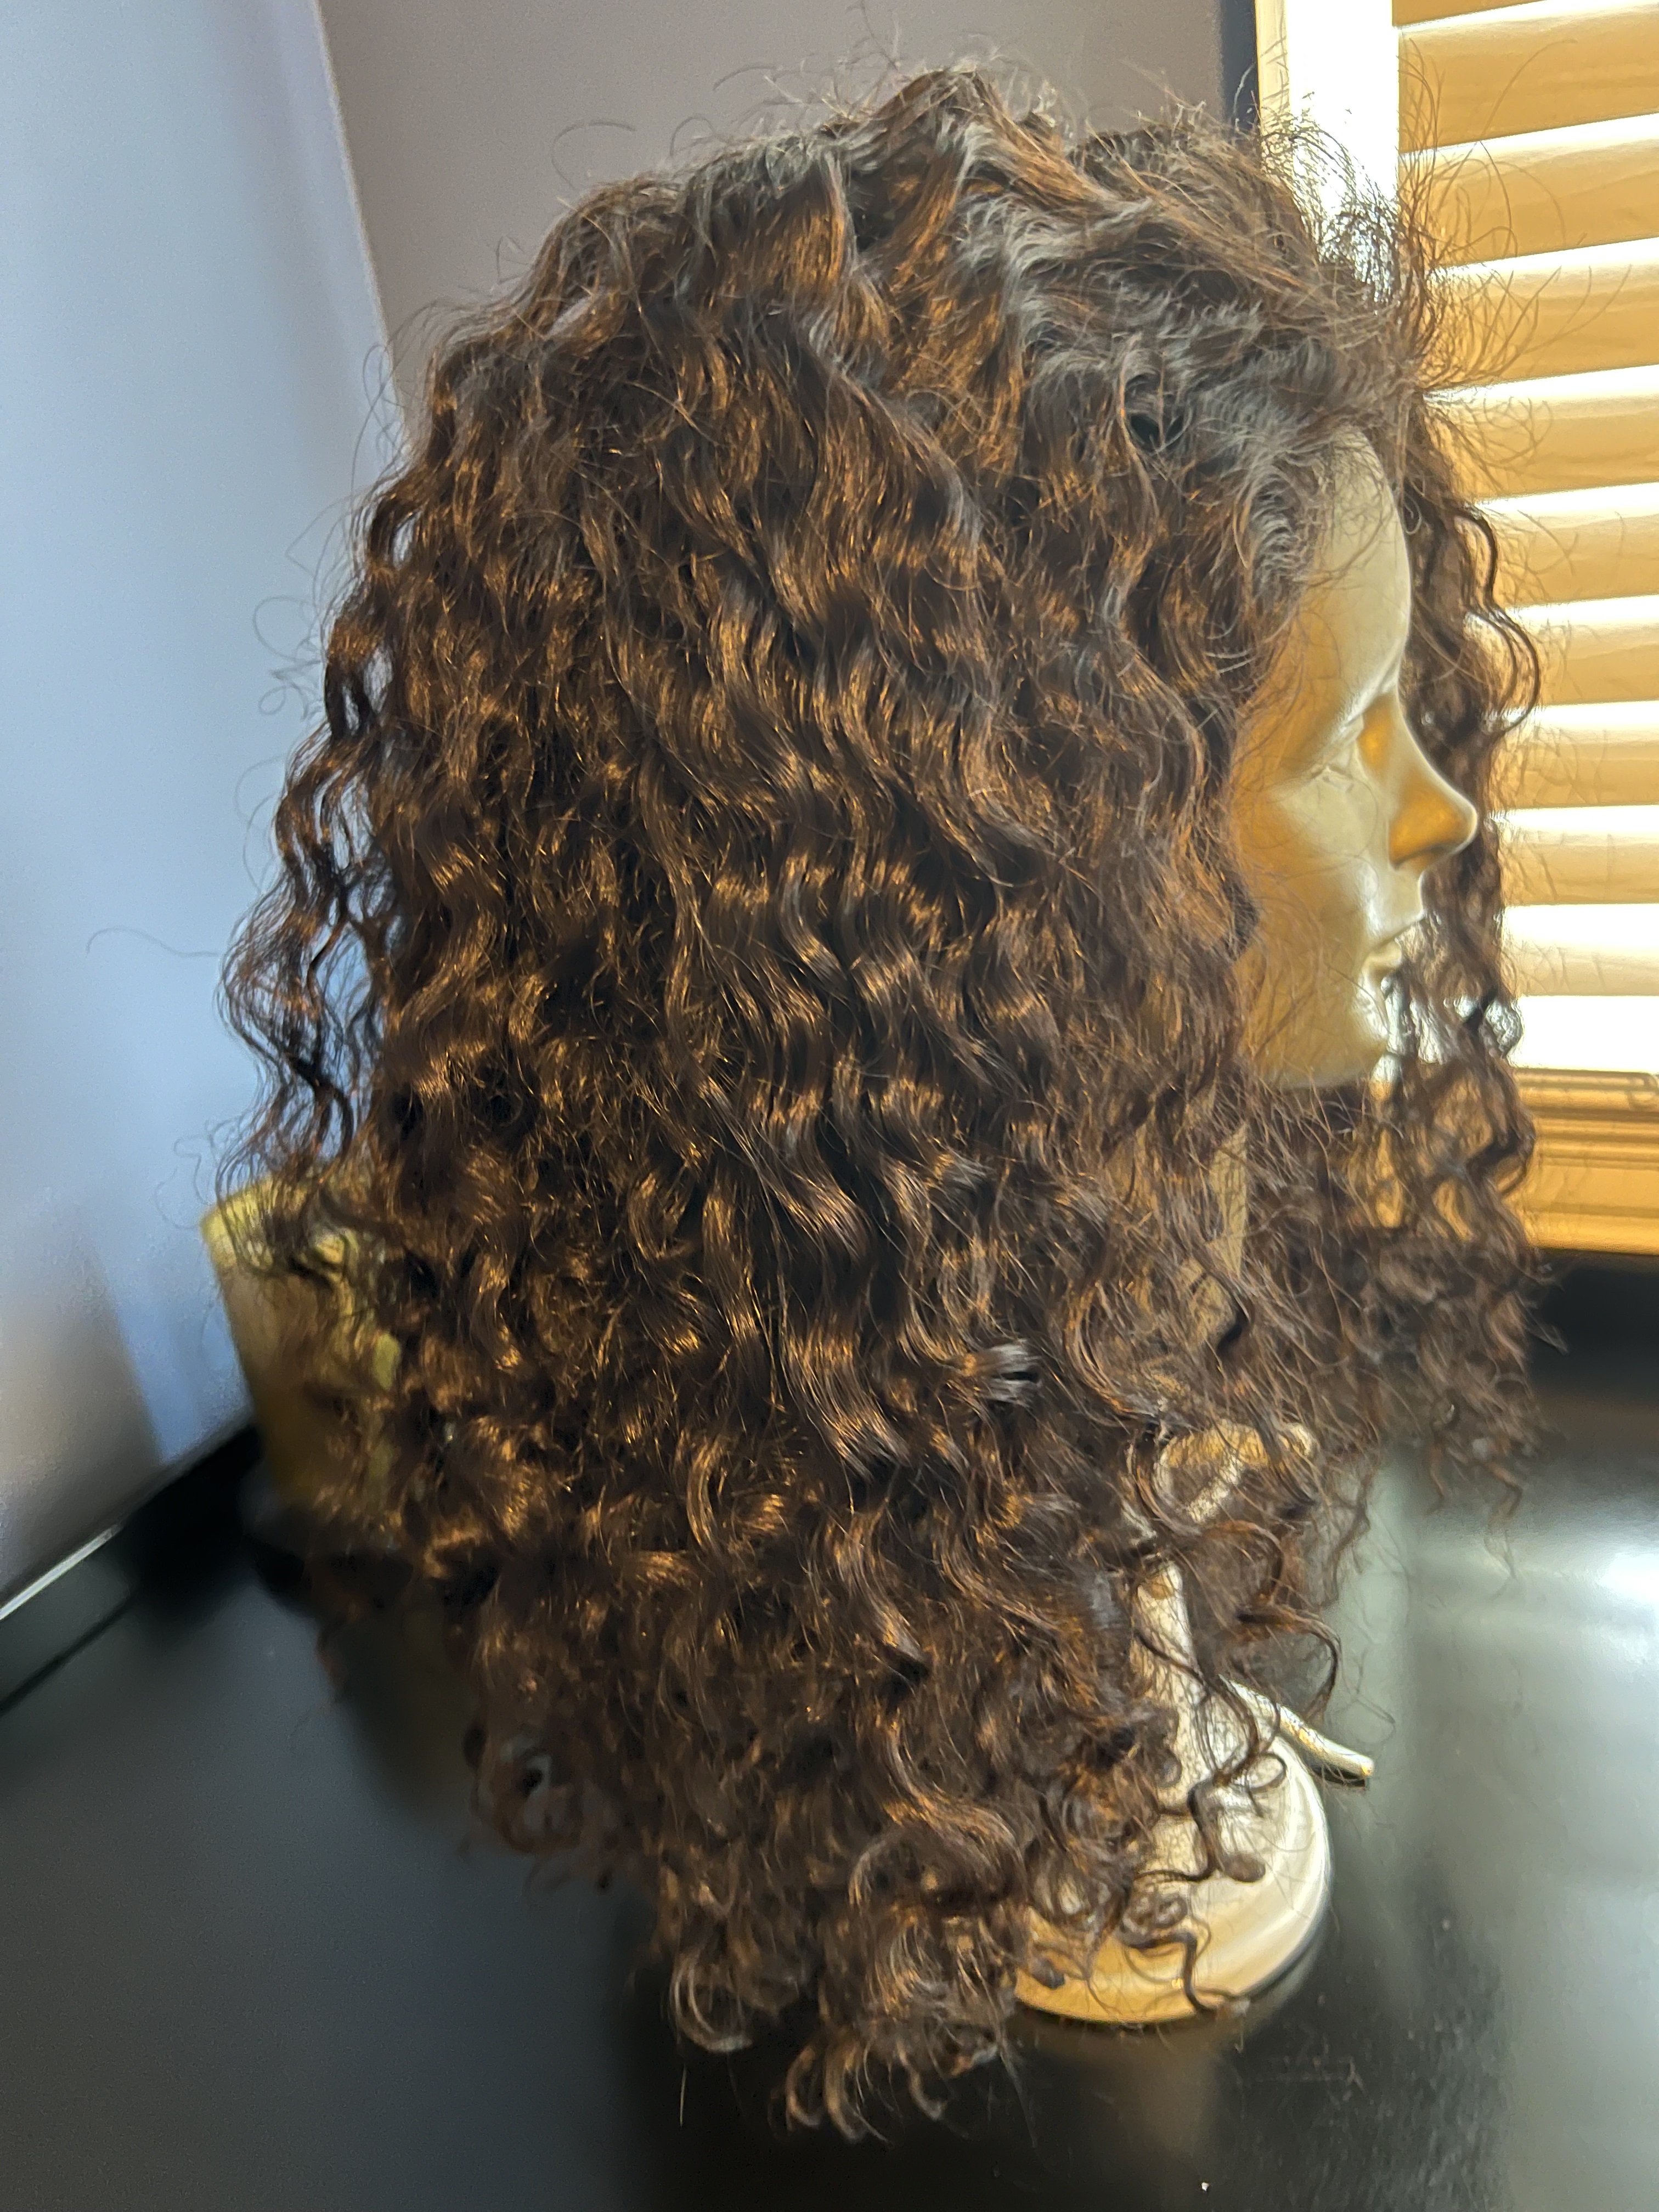 ONYC Hair Review: Tight Kinky Curly 3c-4a